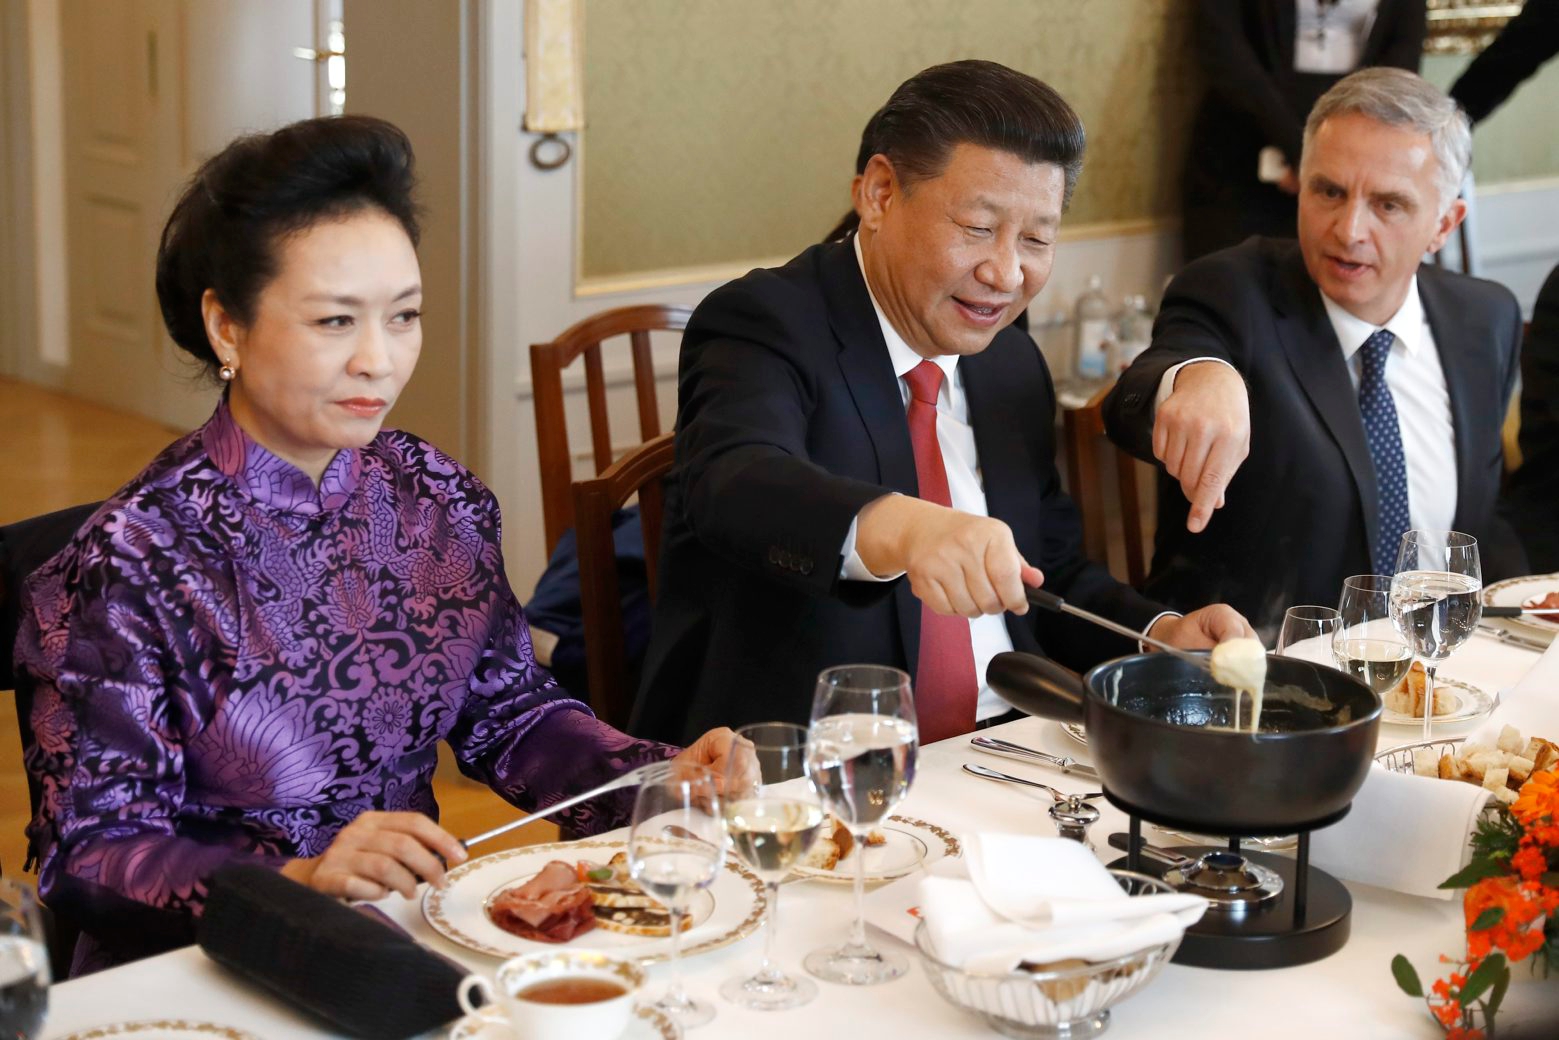 China's President Xi Jinping, center, Xi's wife Peng Liyuan, left, and Swiss Foreign Minister Didier Burkhalter eat Swiss cheese fondue during lunch during Xi's two days state visit to Switzerland in Bern, Switzerland, Monday, January 16, 2017. (KEYSTONE/POOL/Peter Klaunzer) SWITZERLAND CHINA STATE VISIT